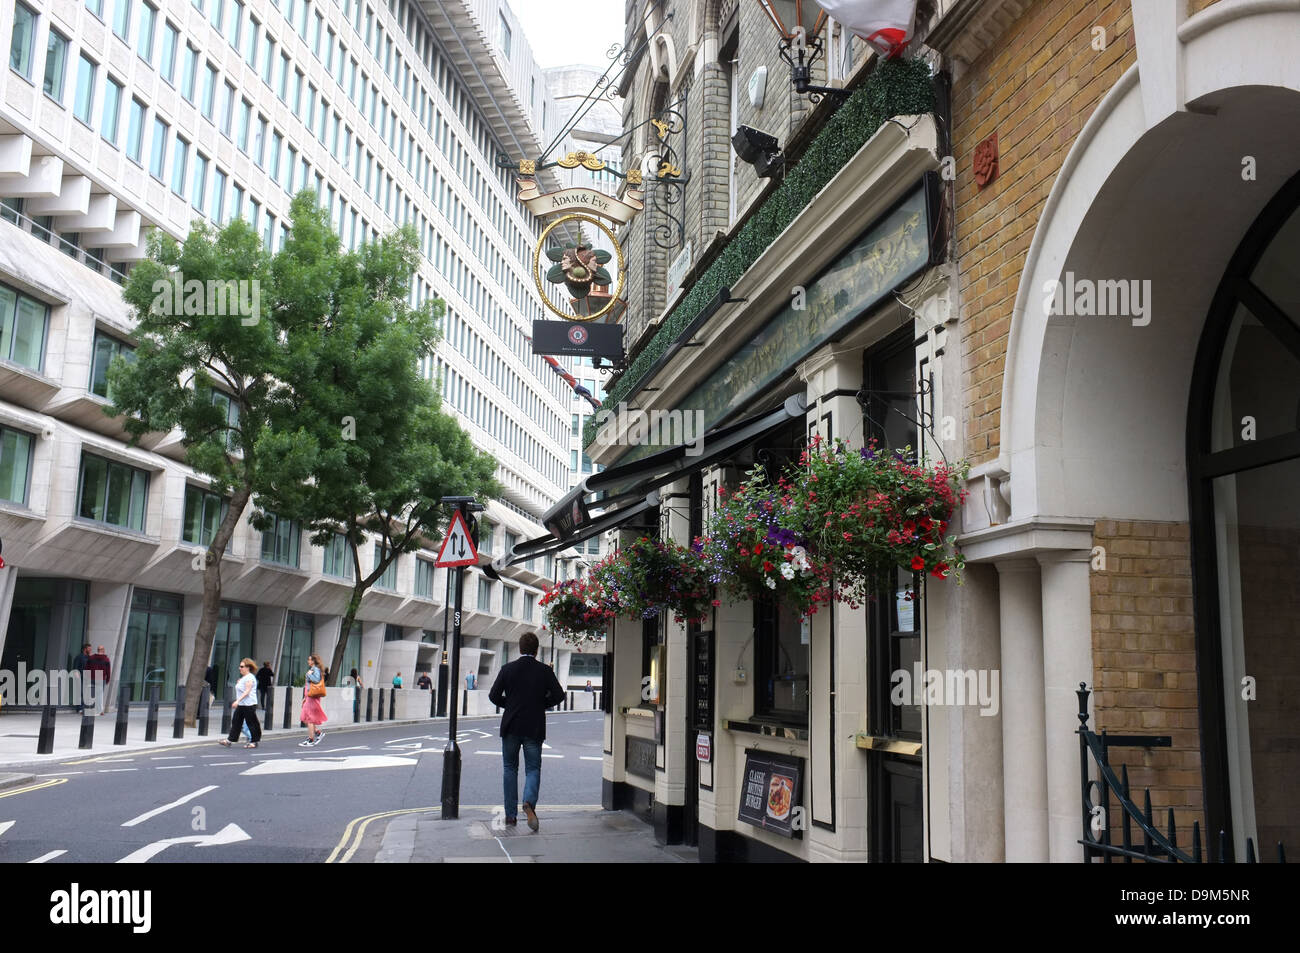 adam and eve tavern city of westminster london uk 2013 Stock Photo